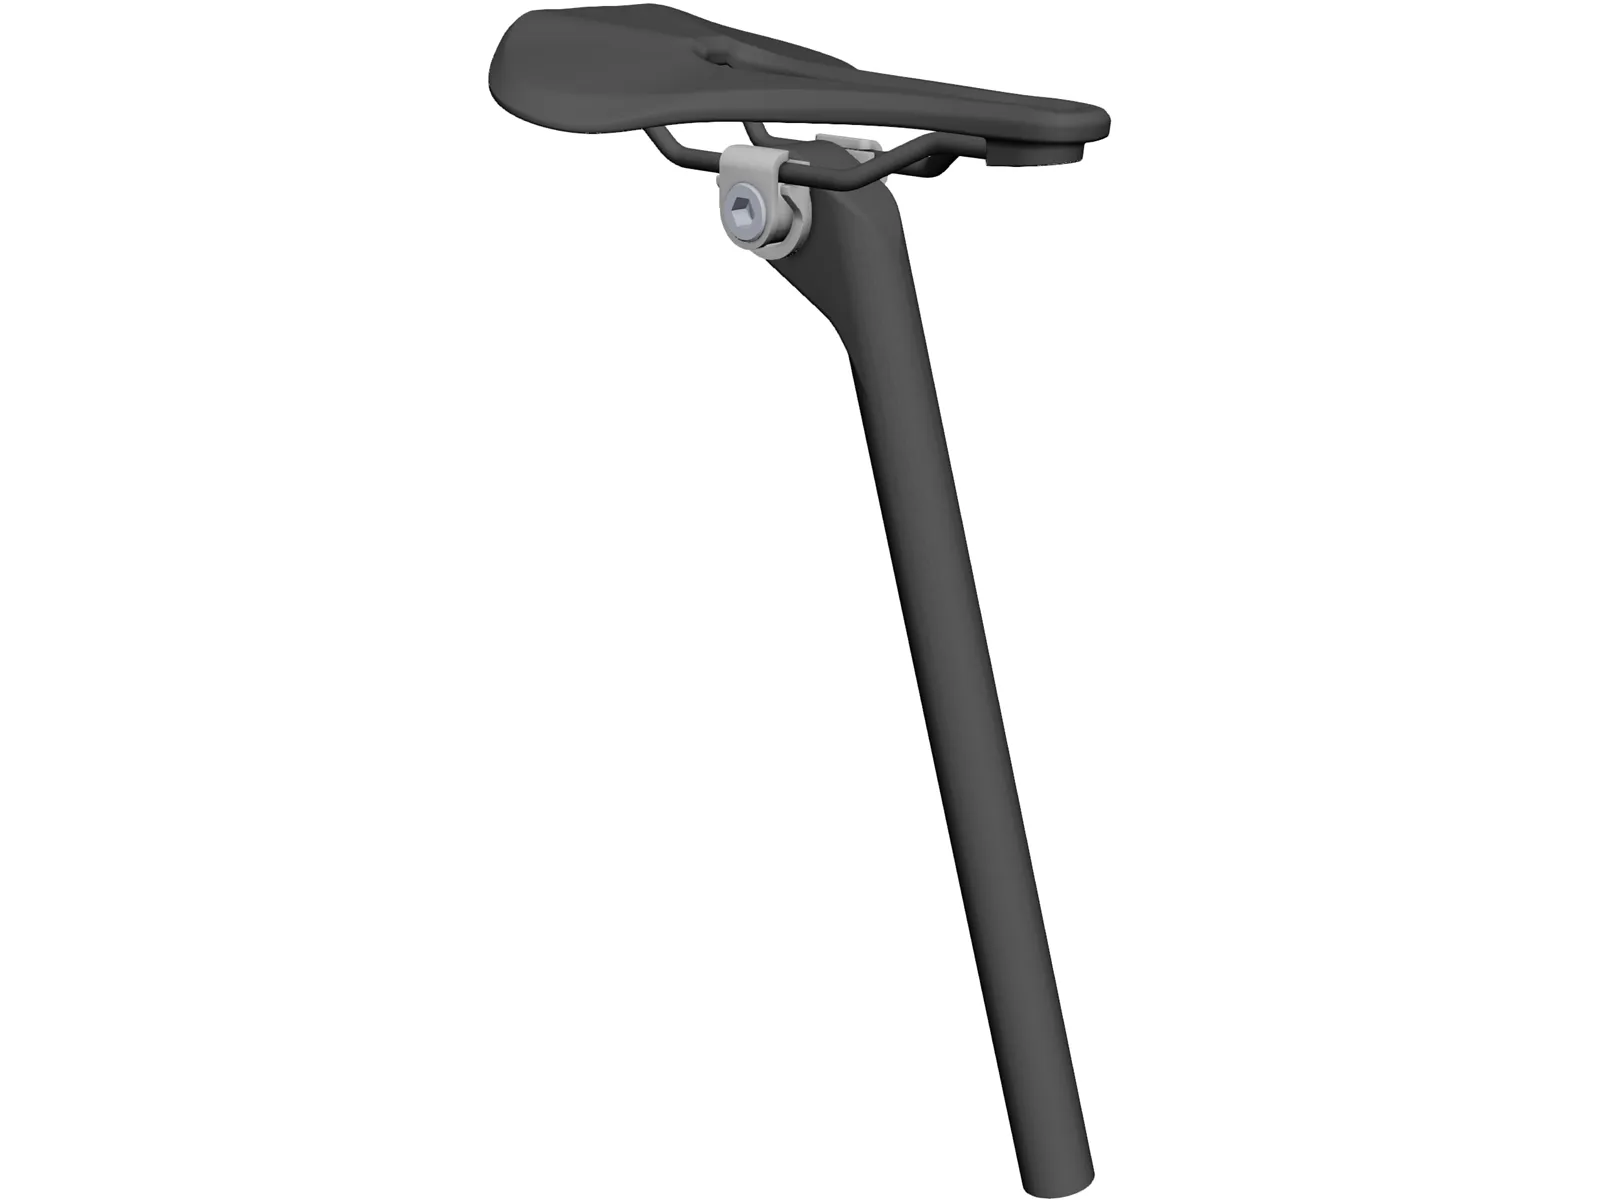 Seat Post with Saddle 3D Model